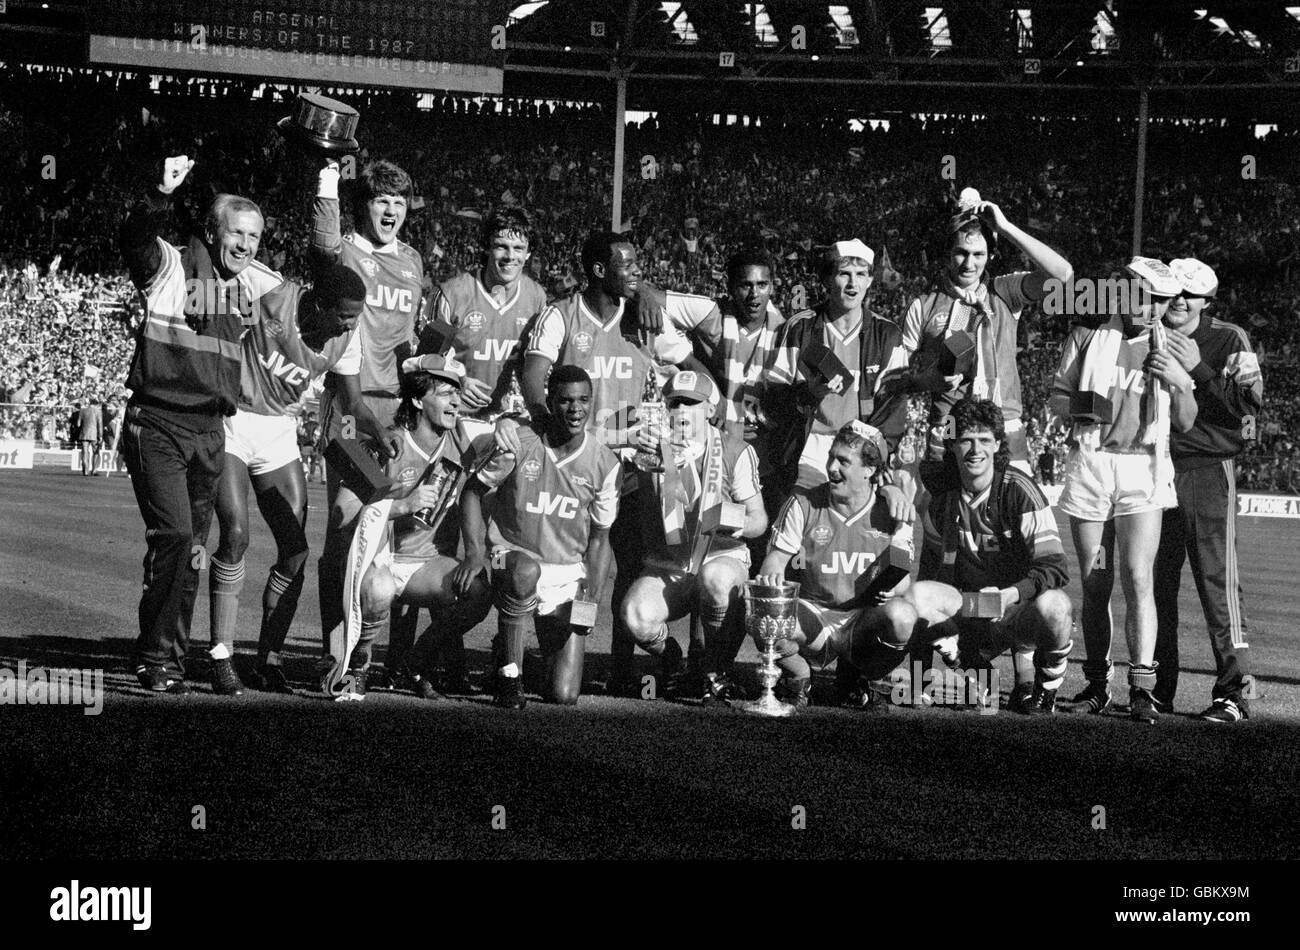 Arsenal celebrate with the Littlewoods Cup after their 2-1 victory: (back row, l-r) assistant manager Theo Foley, Viv Anderson, John Lukic, David O'Leary, Michael Thomas, David Rocastle, Martin Hayes, Tony Adams, Steve Williams, physio Gary Lewin; (front row, l-r) Charlie Nicholas, Paul Davis, Perry Groves, Kenny Sansom, Niall Quinn Stock Photo